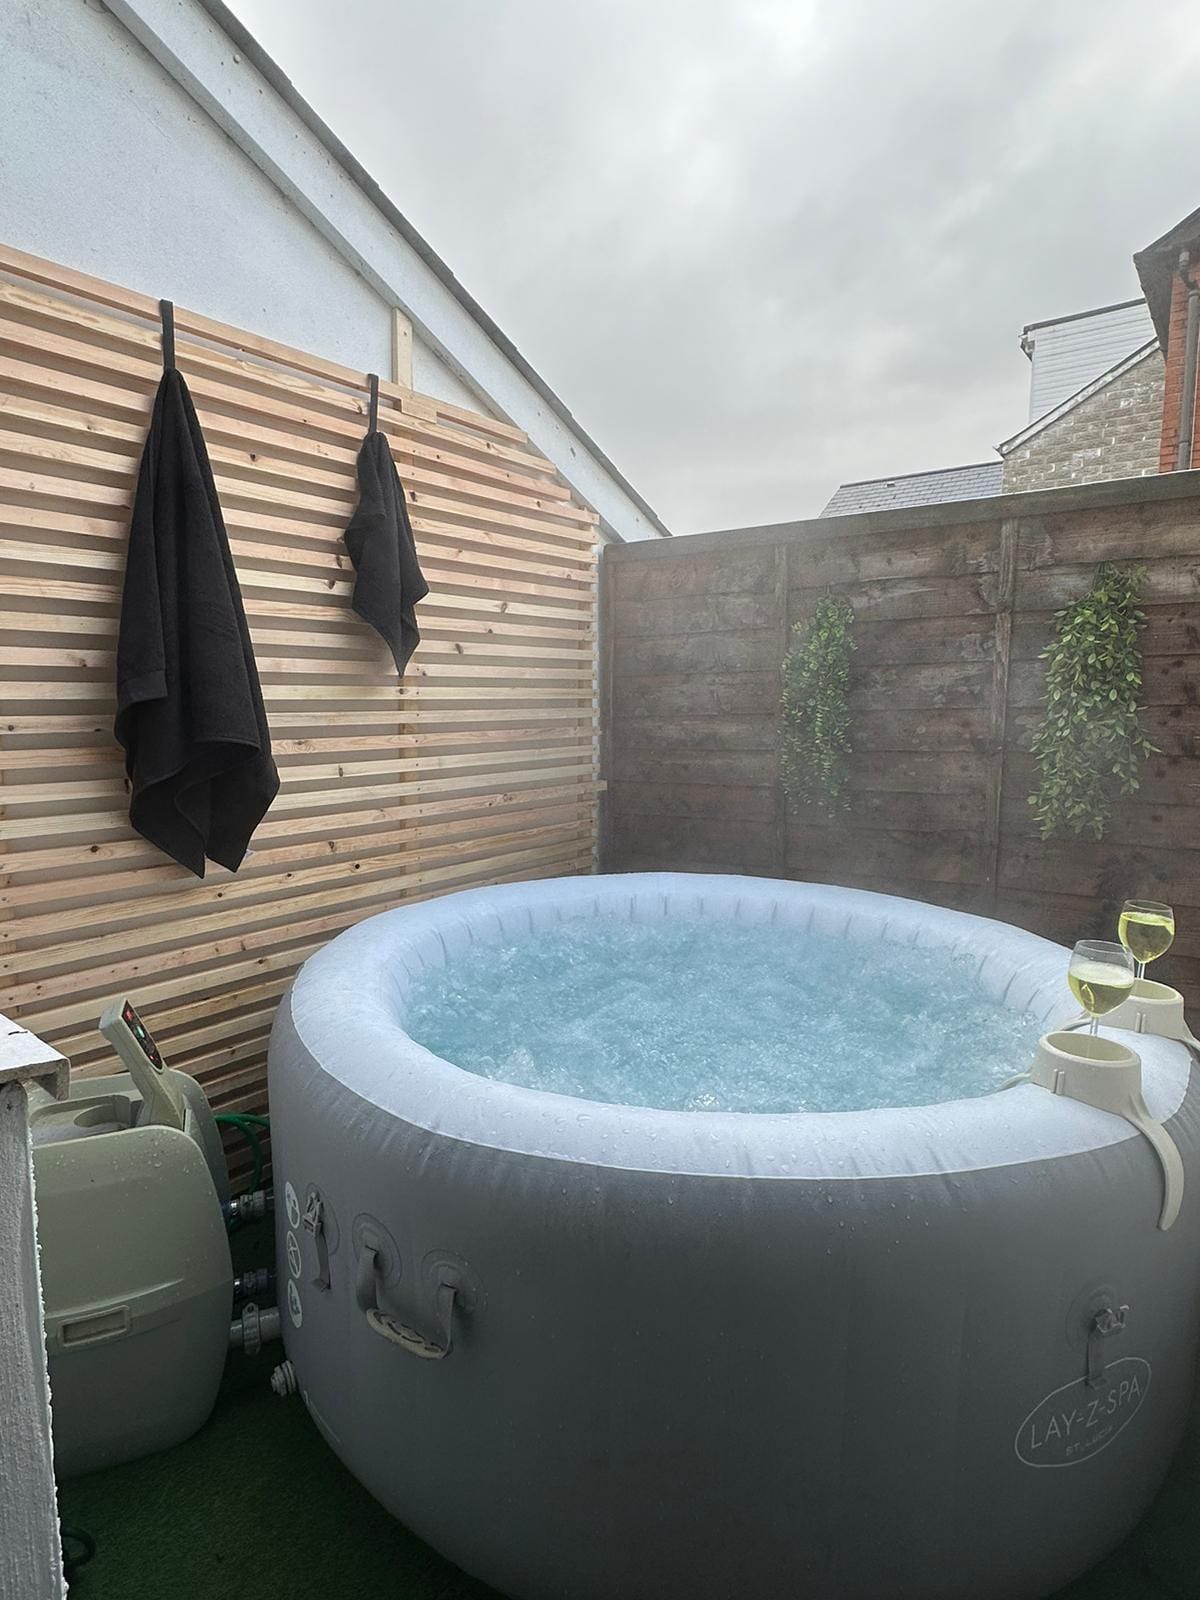 2 Bedroom Flat With Hot Tub Jacuzzi